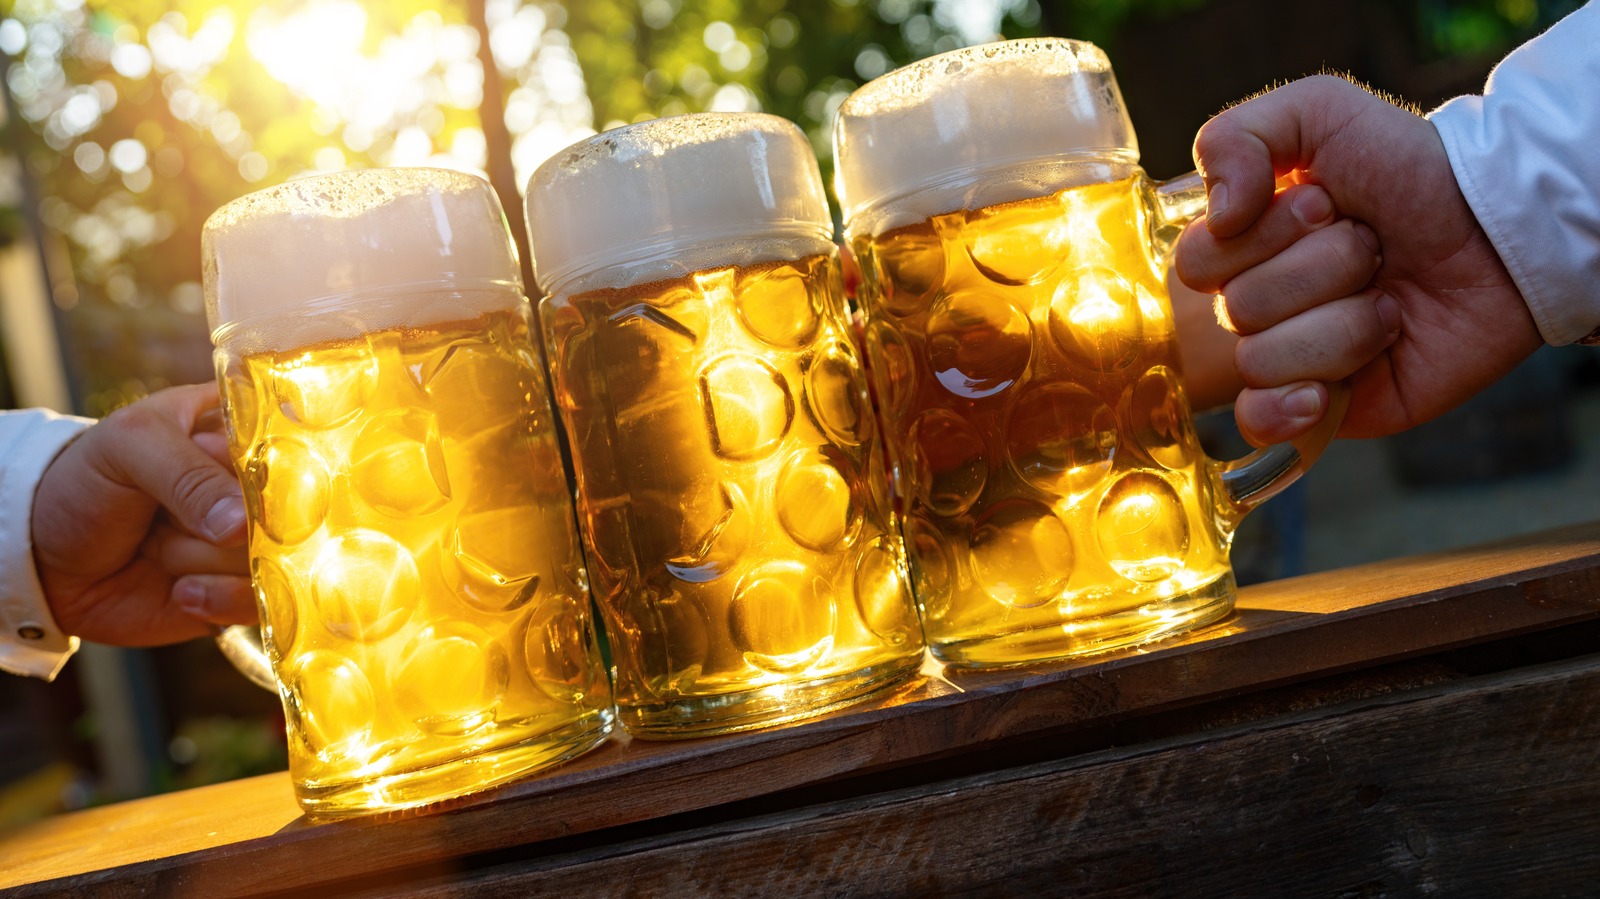 5 Mixers You Need to Make Cheap Beer Taste Better